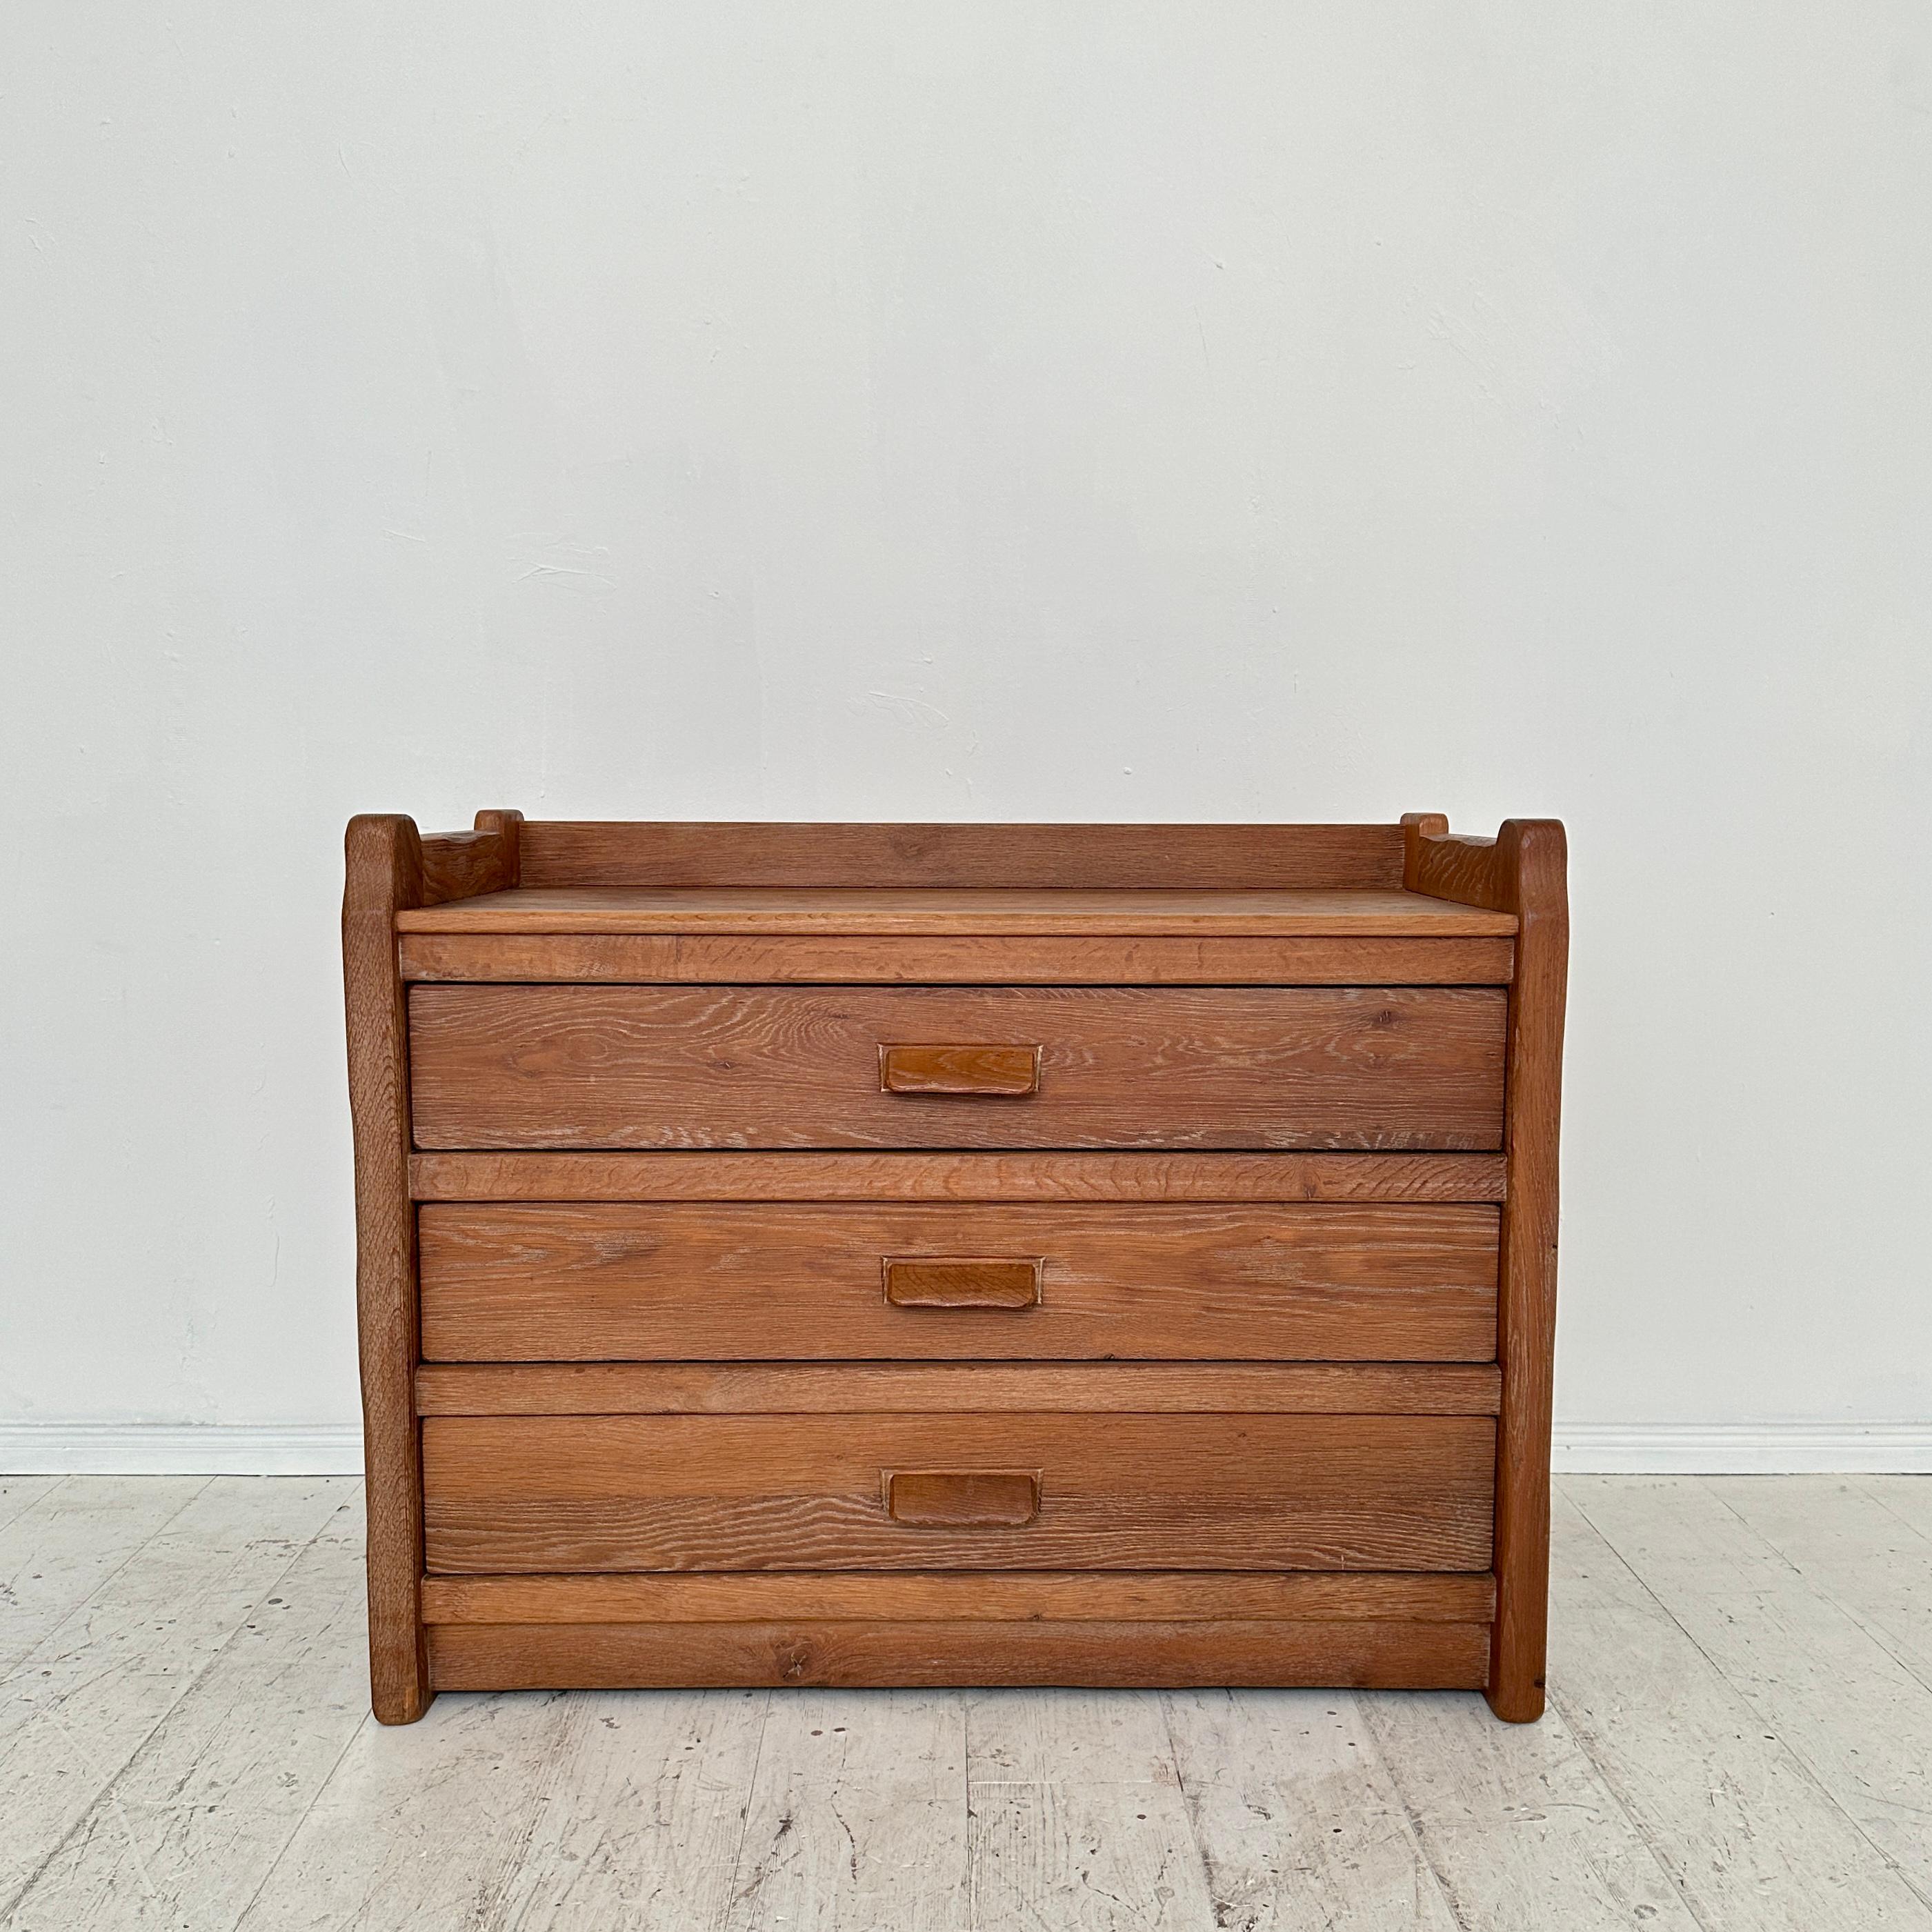 This fantastic 1970s Brutalist Chest of Drawers in Solid Washed Oak by de Puydt was made around 1974.
A unique piece which is a great eye-catcher for your antique, modern, space age or mid-century interior.
If you have any more questions we are very